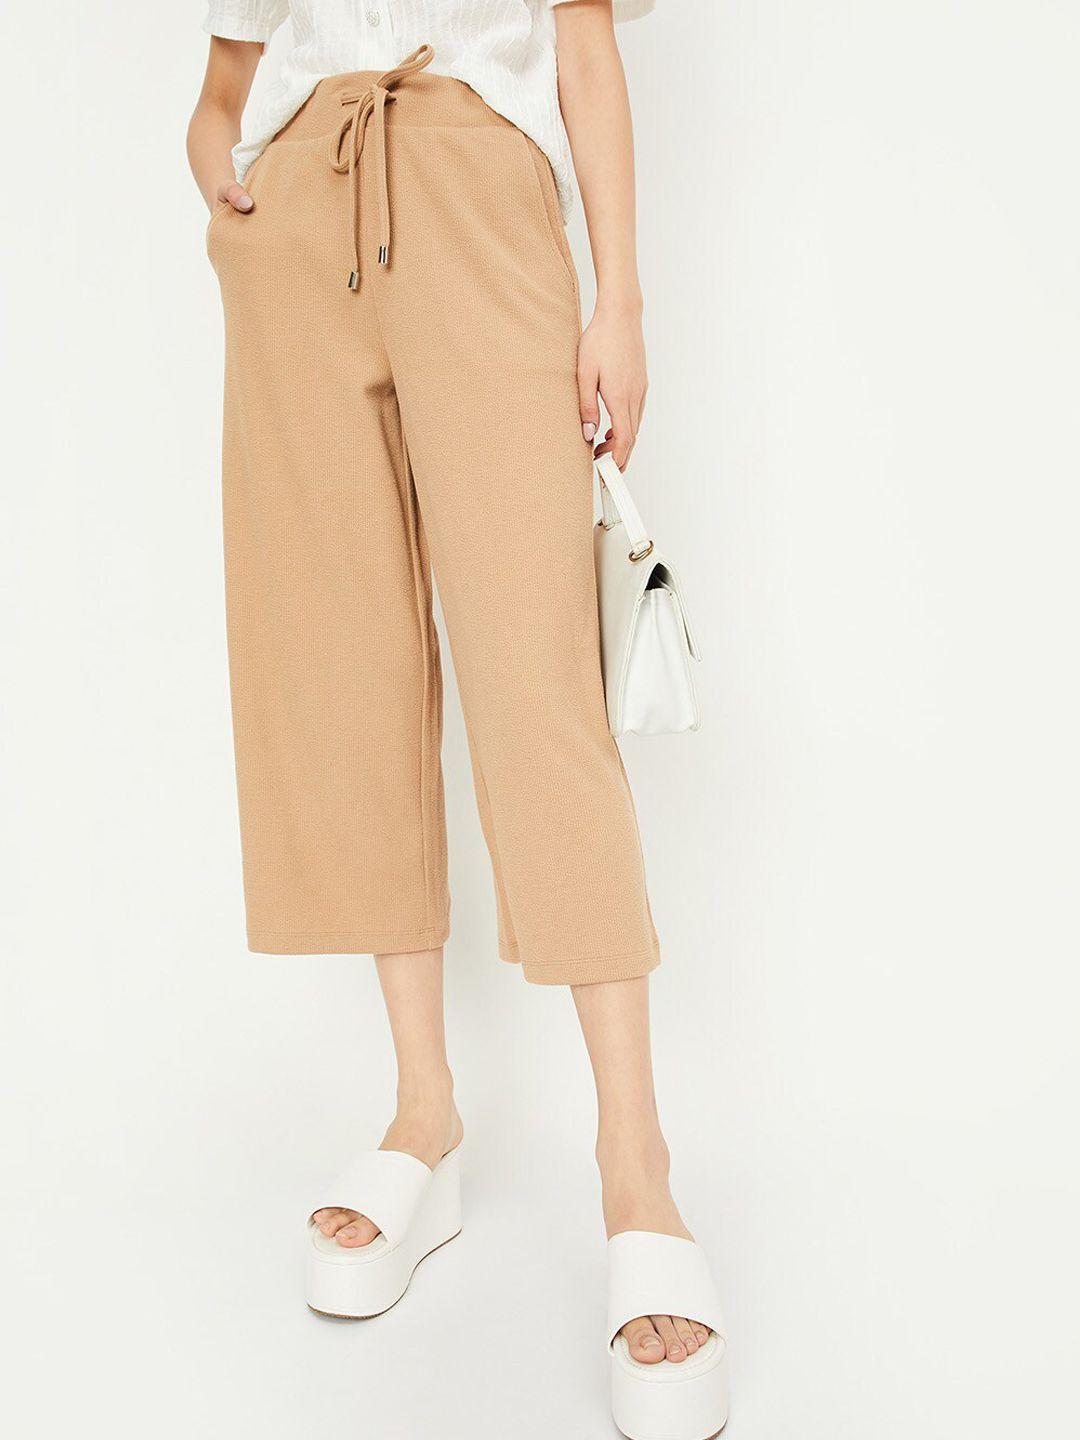 max women culottes trousers